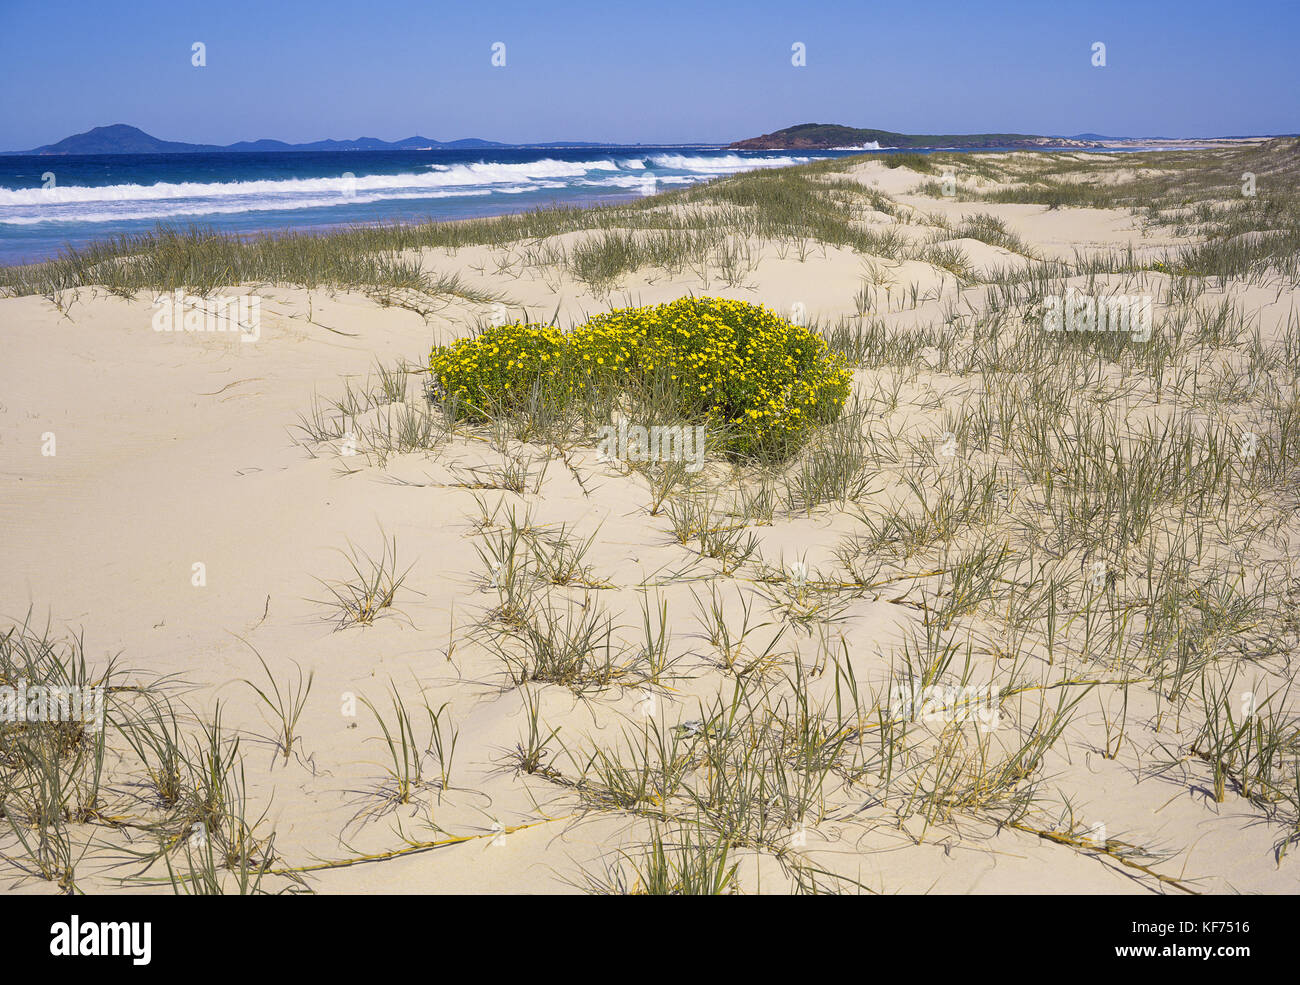 Mungo Beach with Broughton Island in the background, and Beach spinifex (Spinifex sericeus) and Beach daisy (Arctotheca populifolia). Myall Lakes Nati Stock Photo